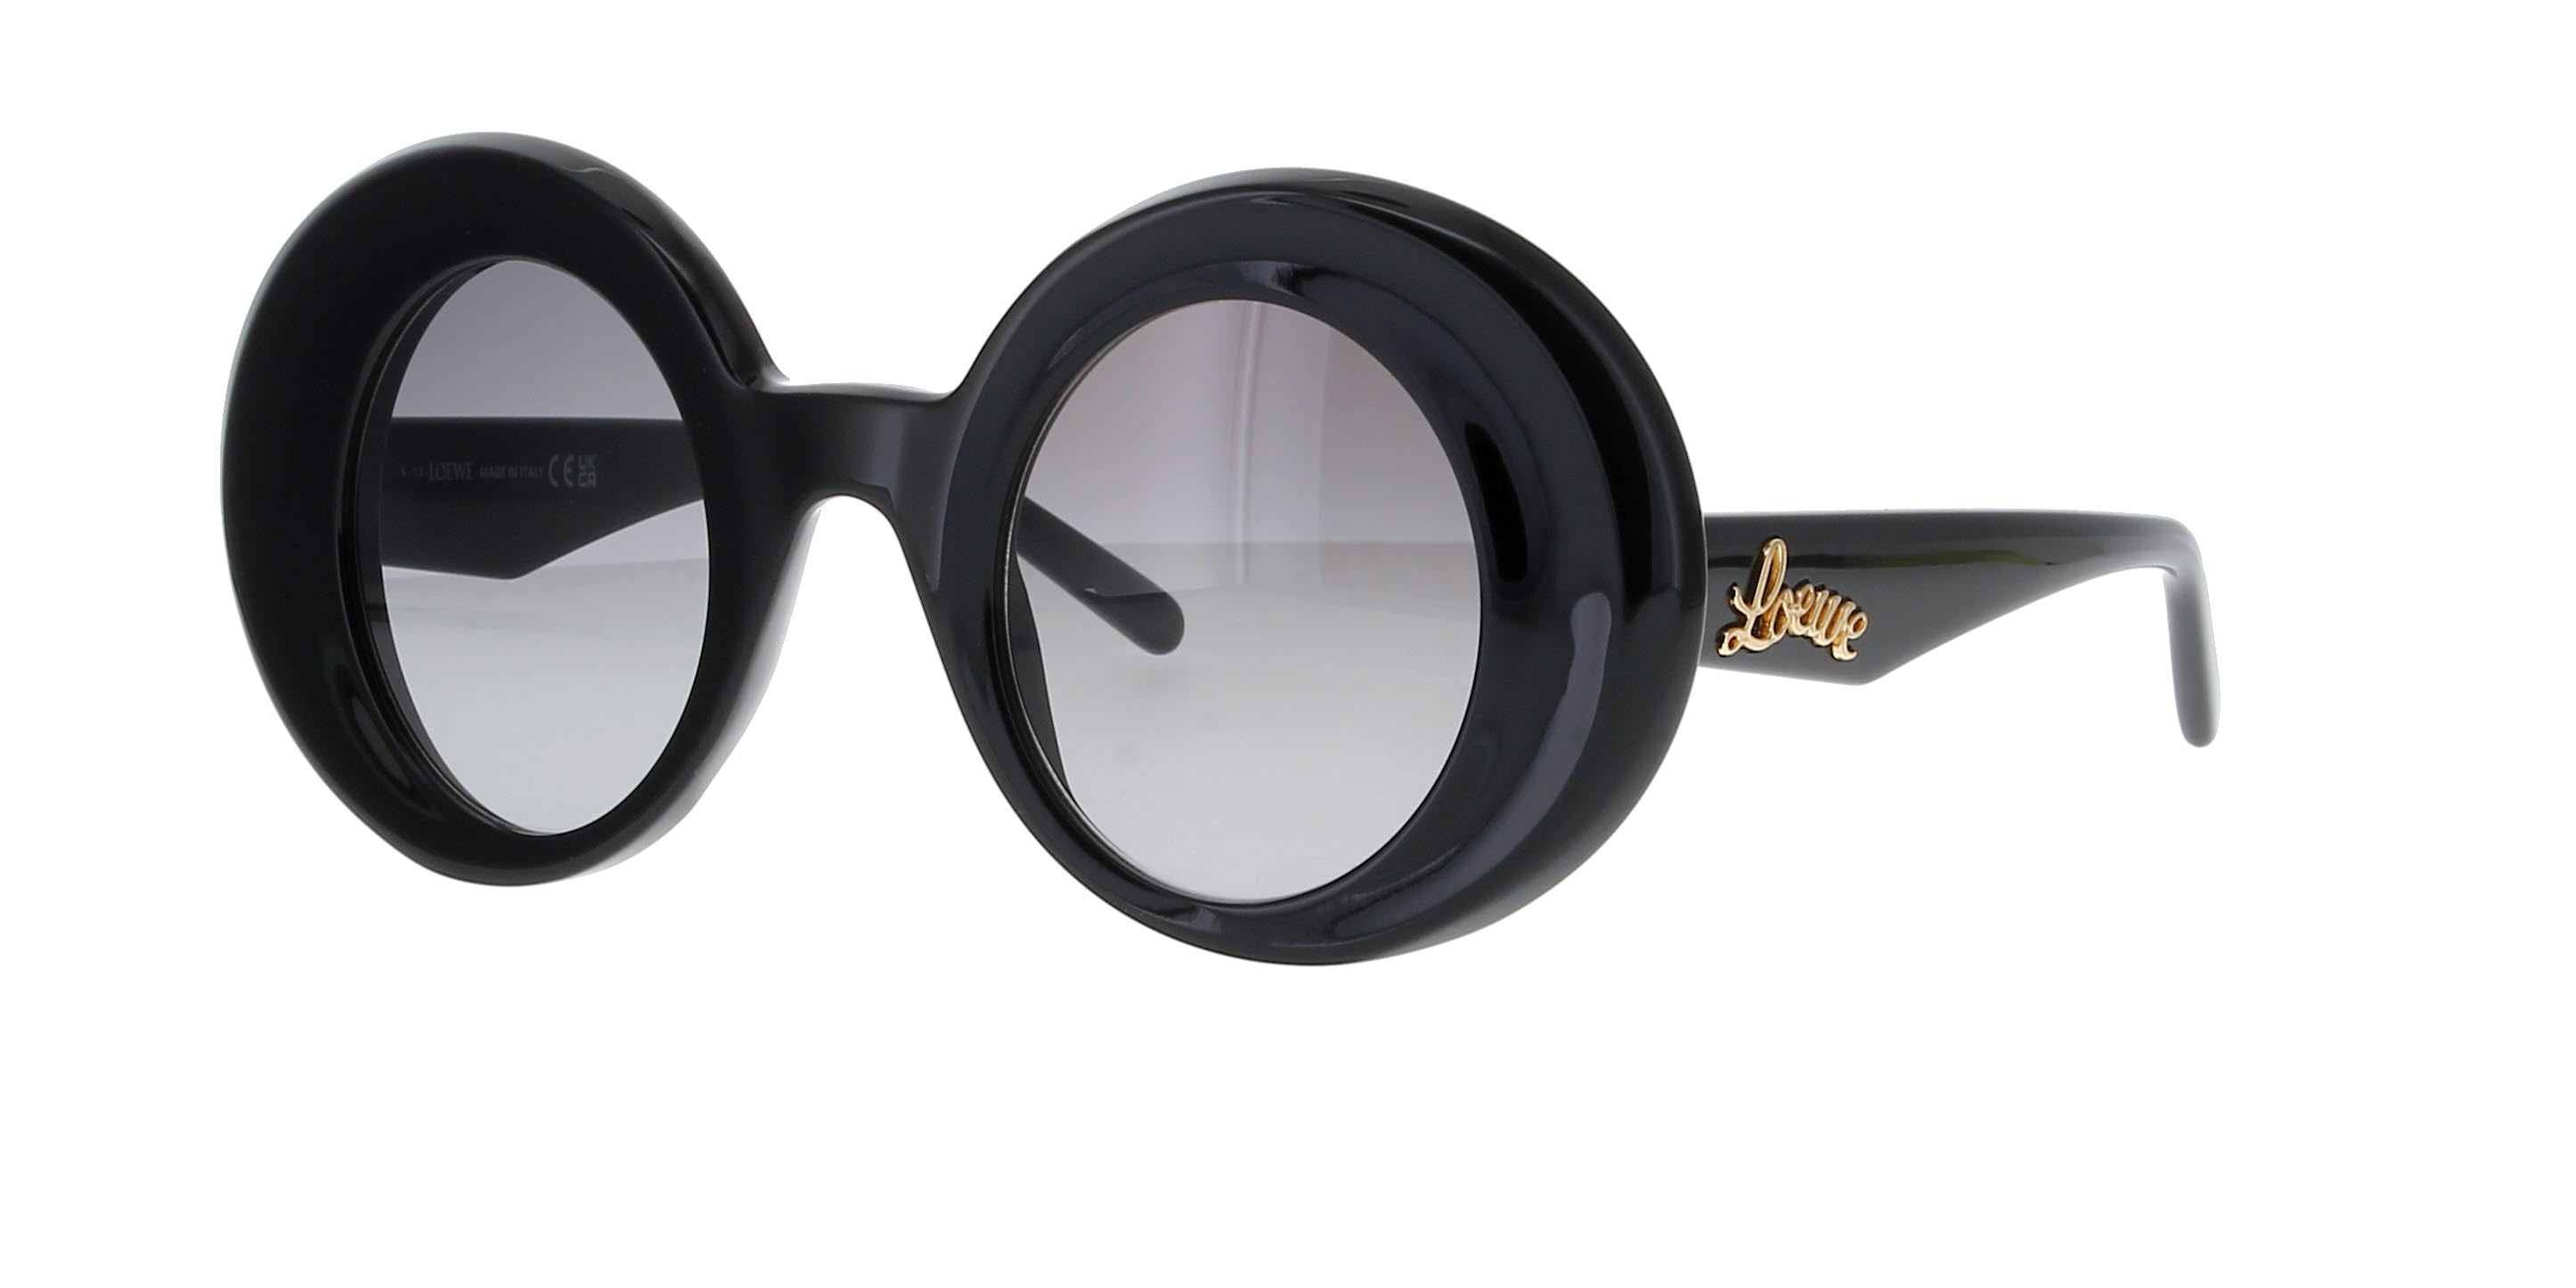 Trend: get bright eyed with the flashest men's sunglasses this season Opt  for flash new sunglasses this season with the latest in men's eyewear.  Square and round shapes in black, gold and